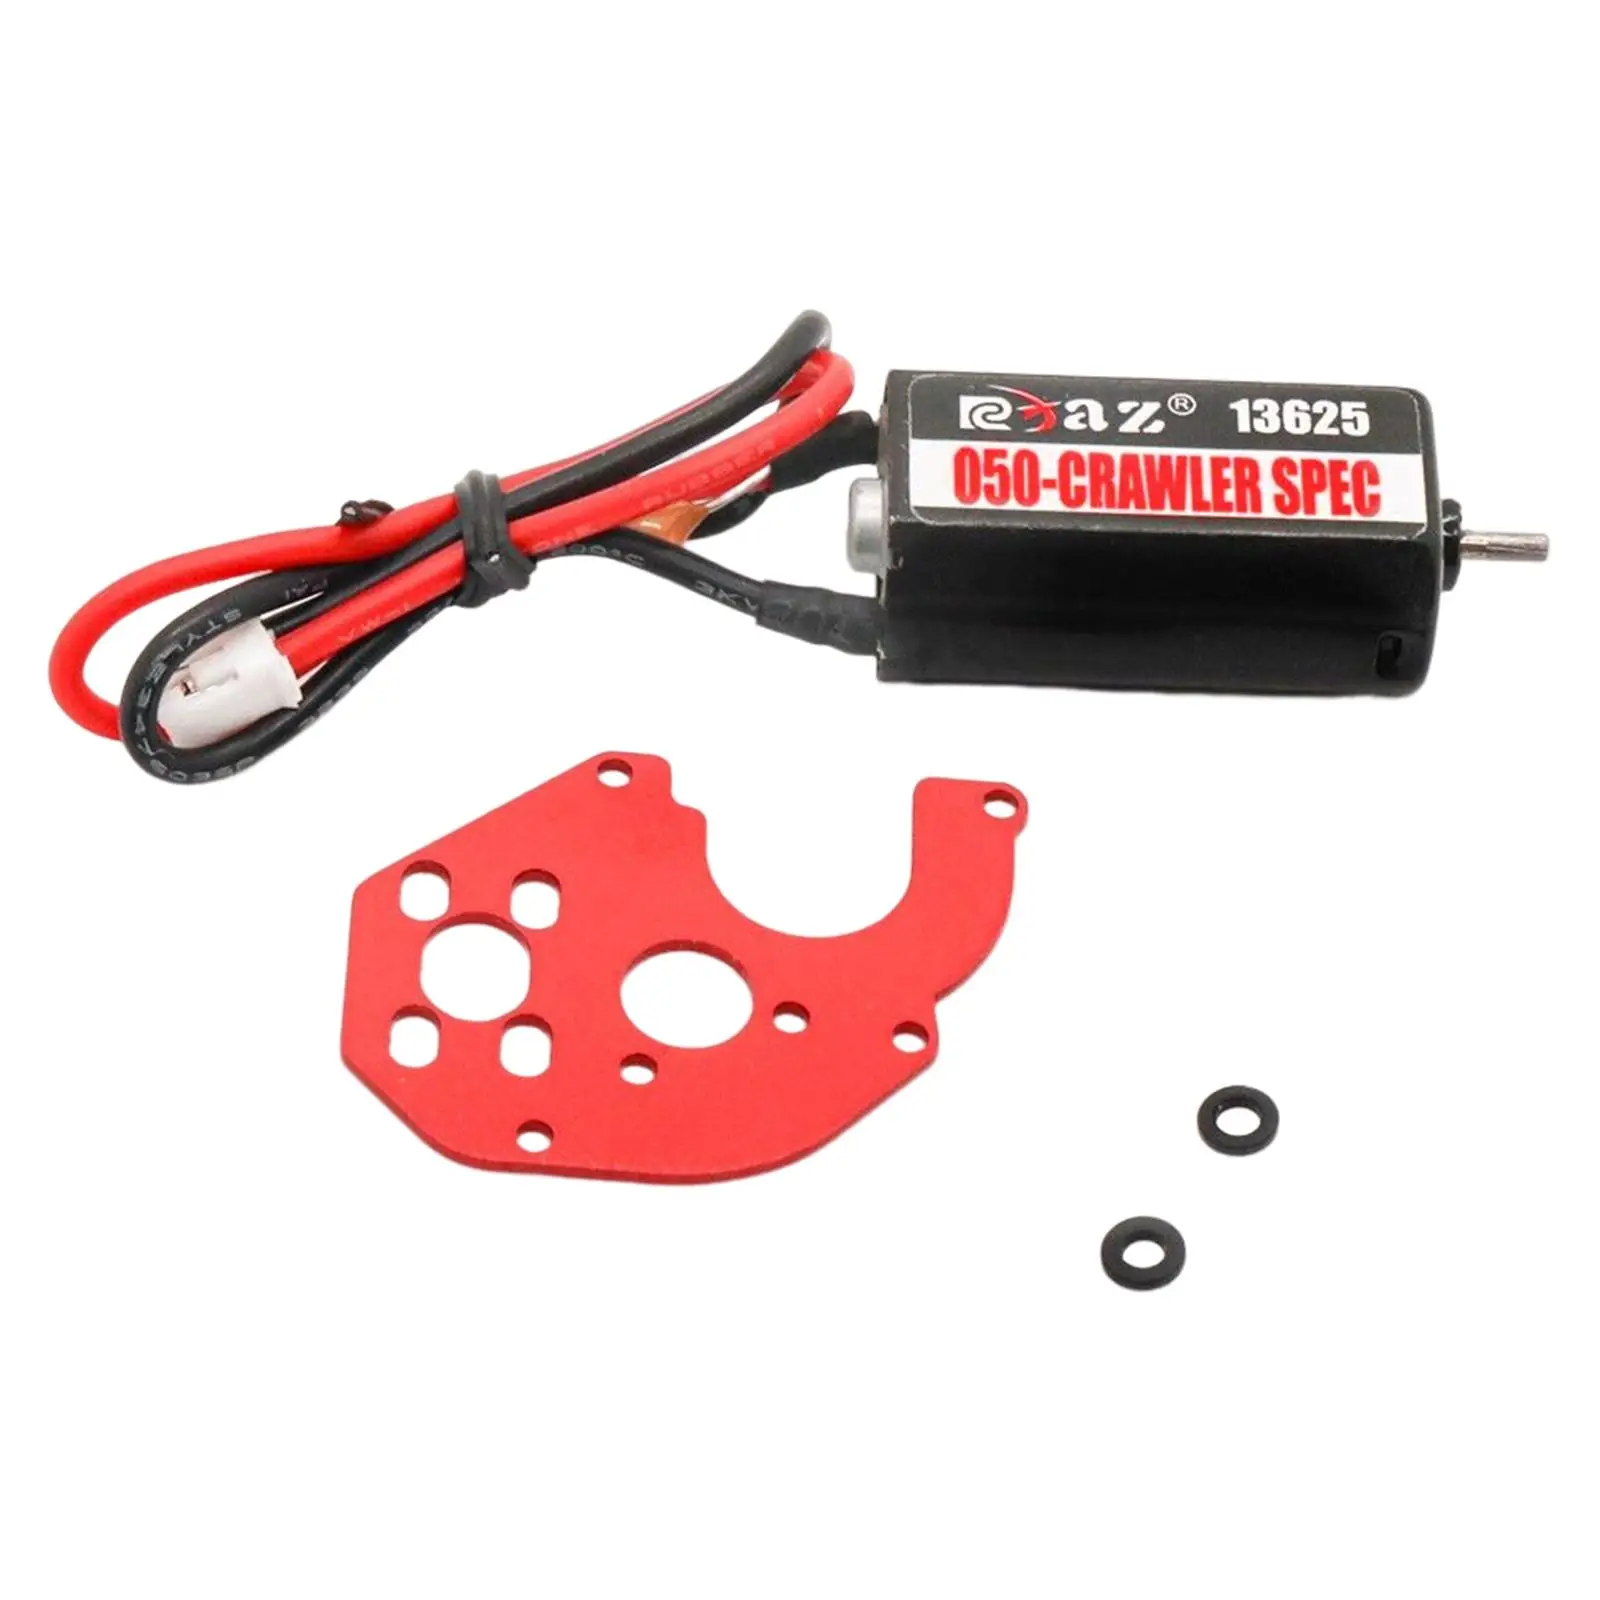 RC Brushed Motor 050 60T with Red Metal Mount for 1/24 Crawler Axial SCX24 Axi00001 Axi00002 Axi00004 Accessories